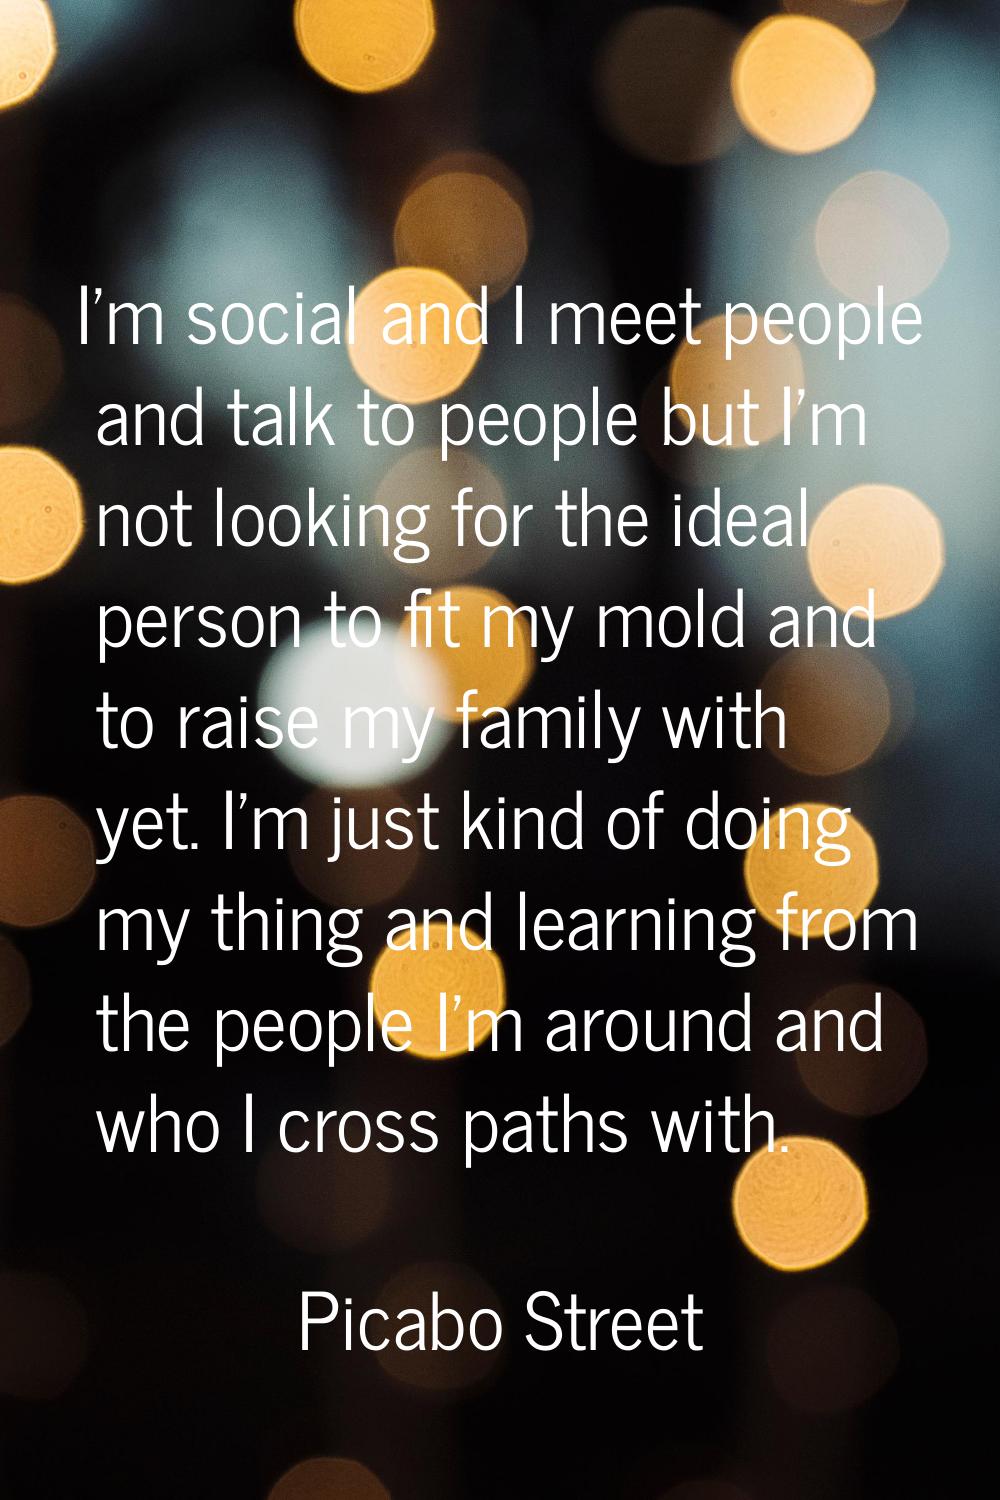 I'm social and I meet people and talk to people but I'm not looking for the ideal person to fit my 